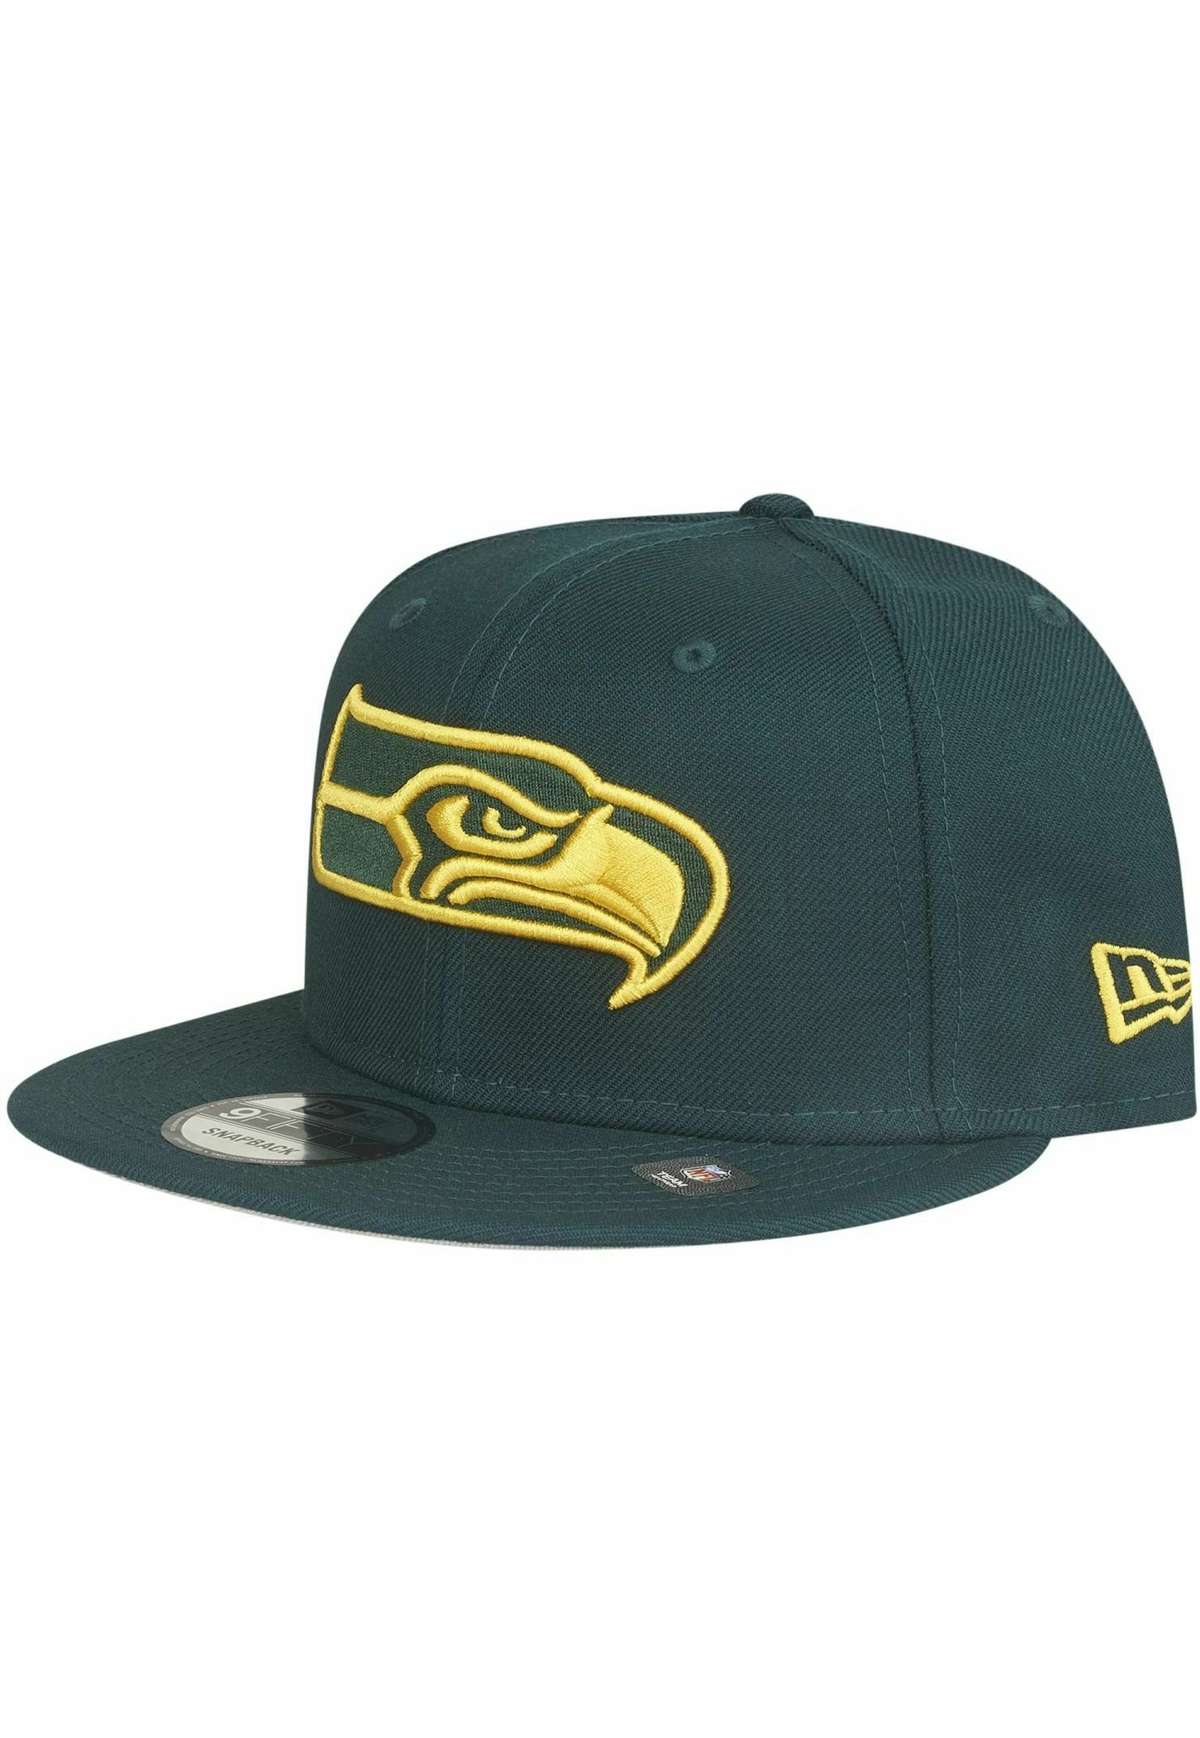 Кепка 9FIFTY SEATTLE SEAHAWKS